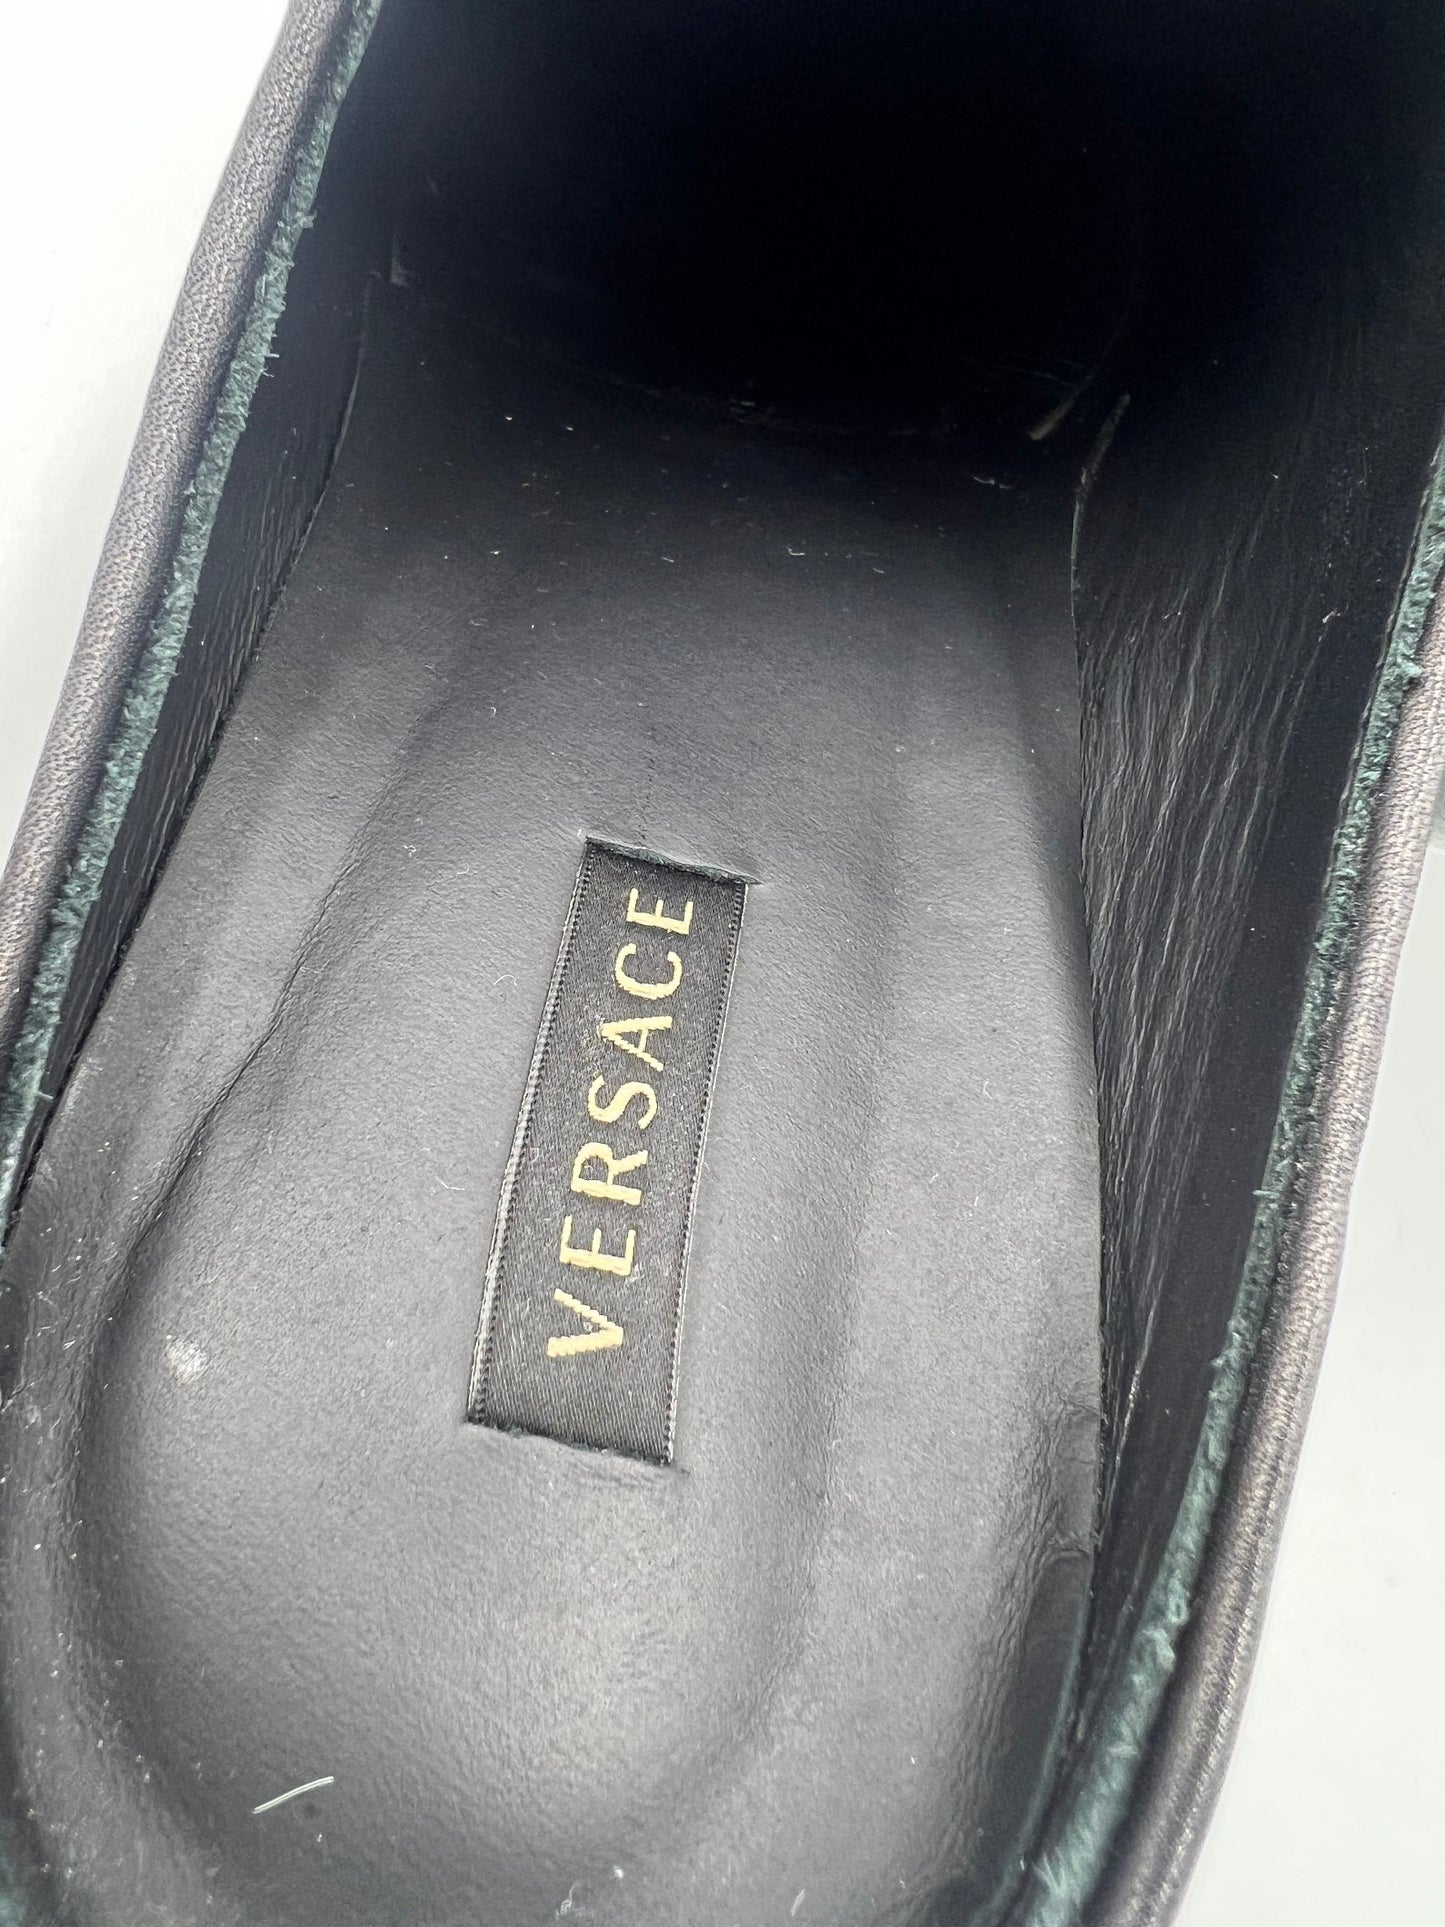 Shoes Luxury Designer By Versace  Size: 7.5